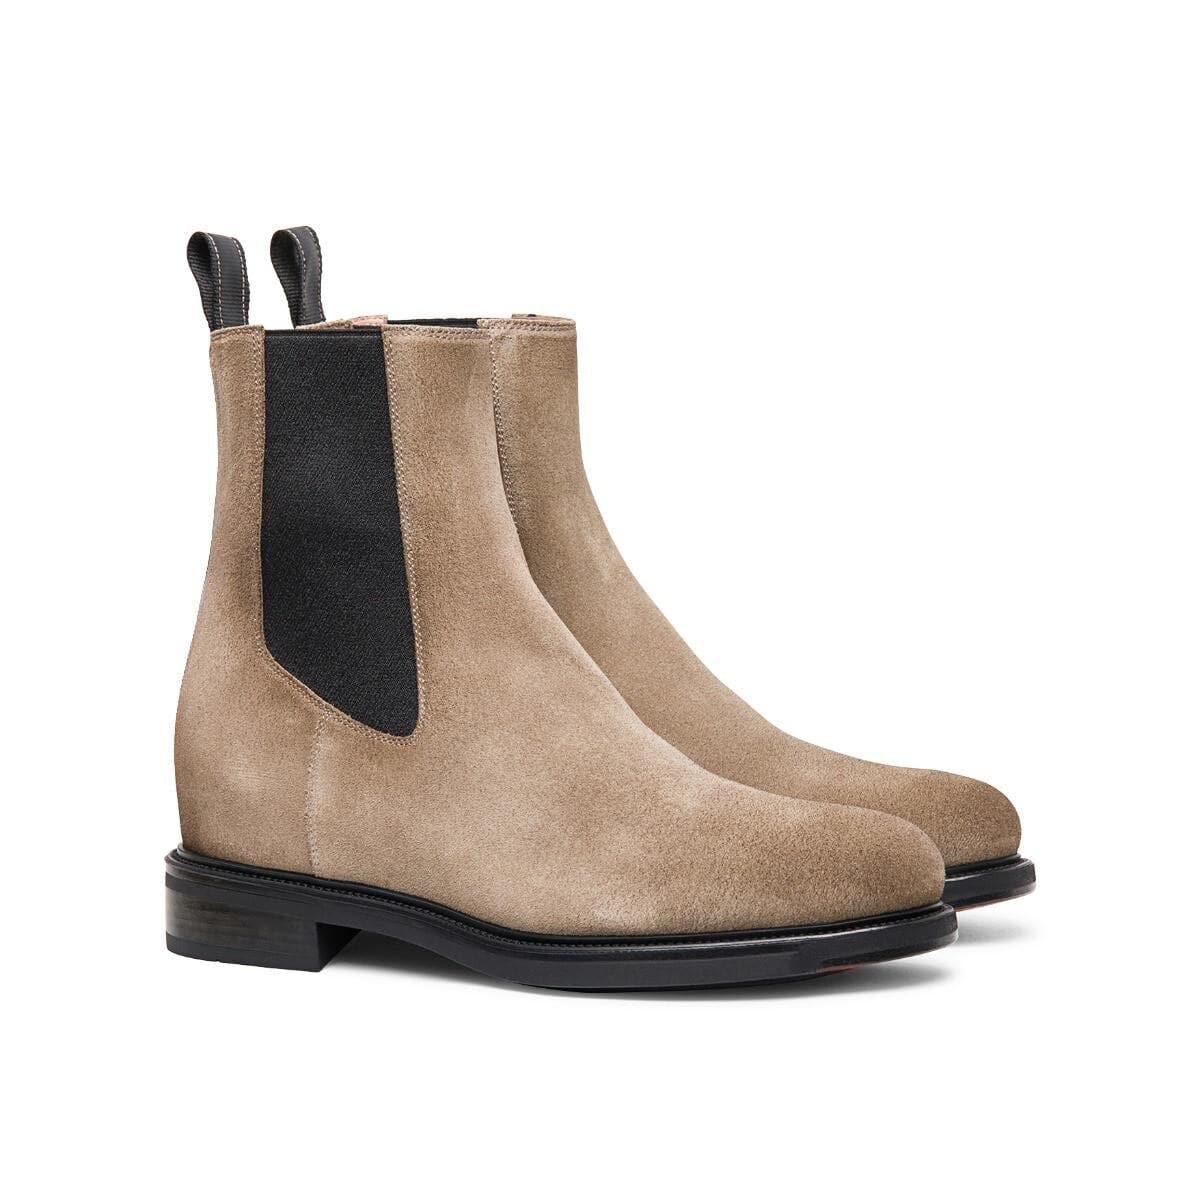 Beatles Women's Suede Ankle Boots - Taupe